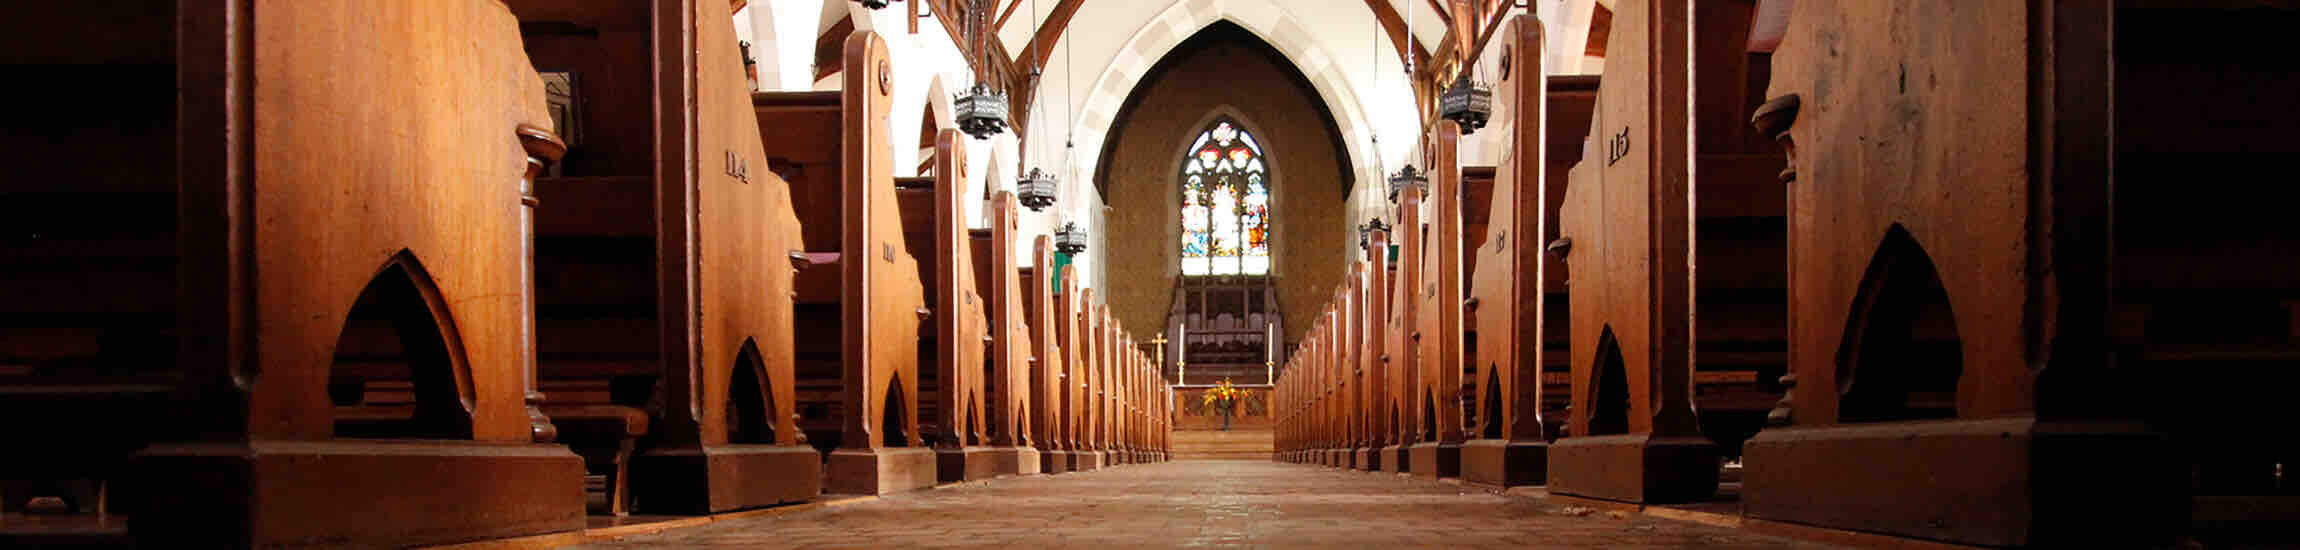 Rows of wooden pews